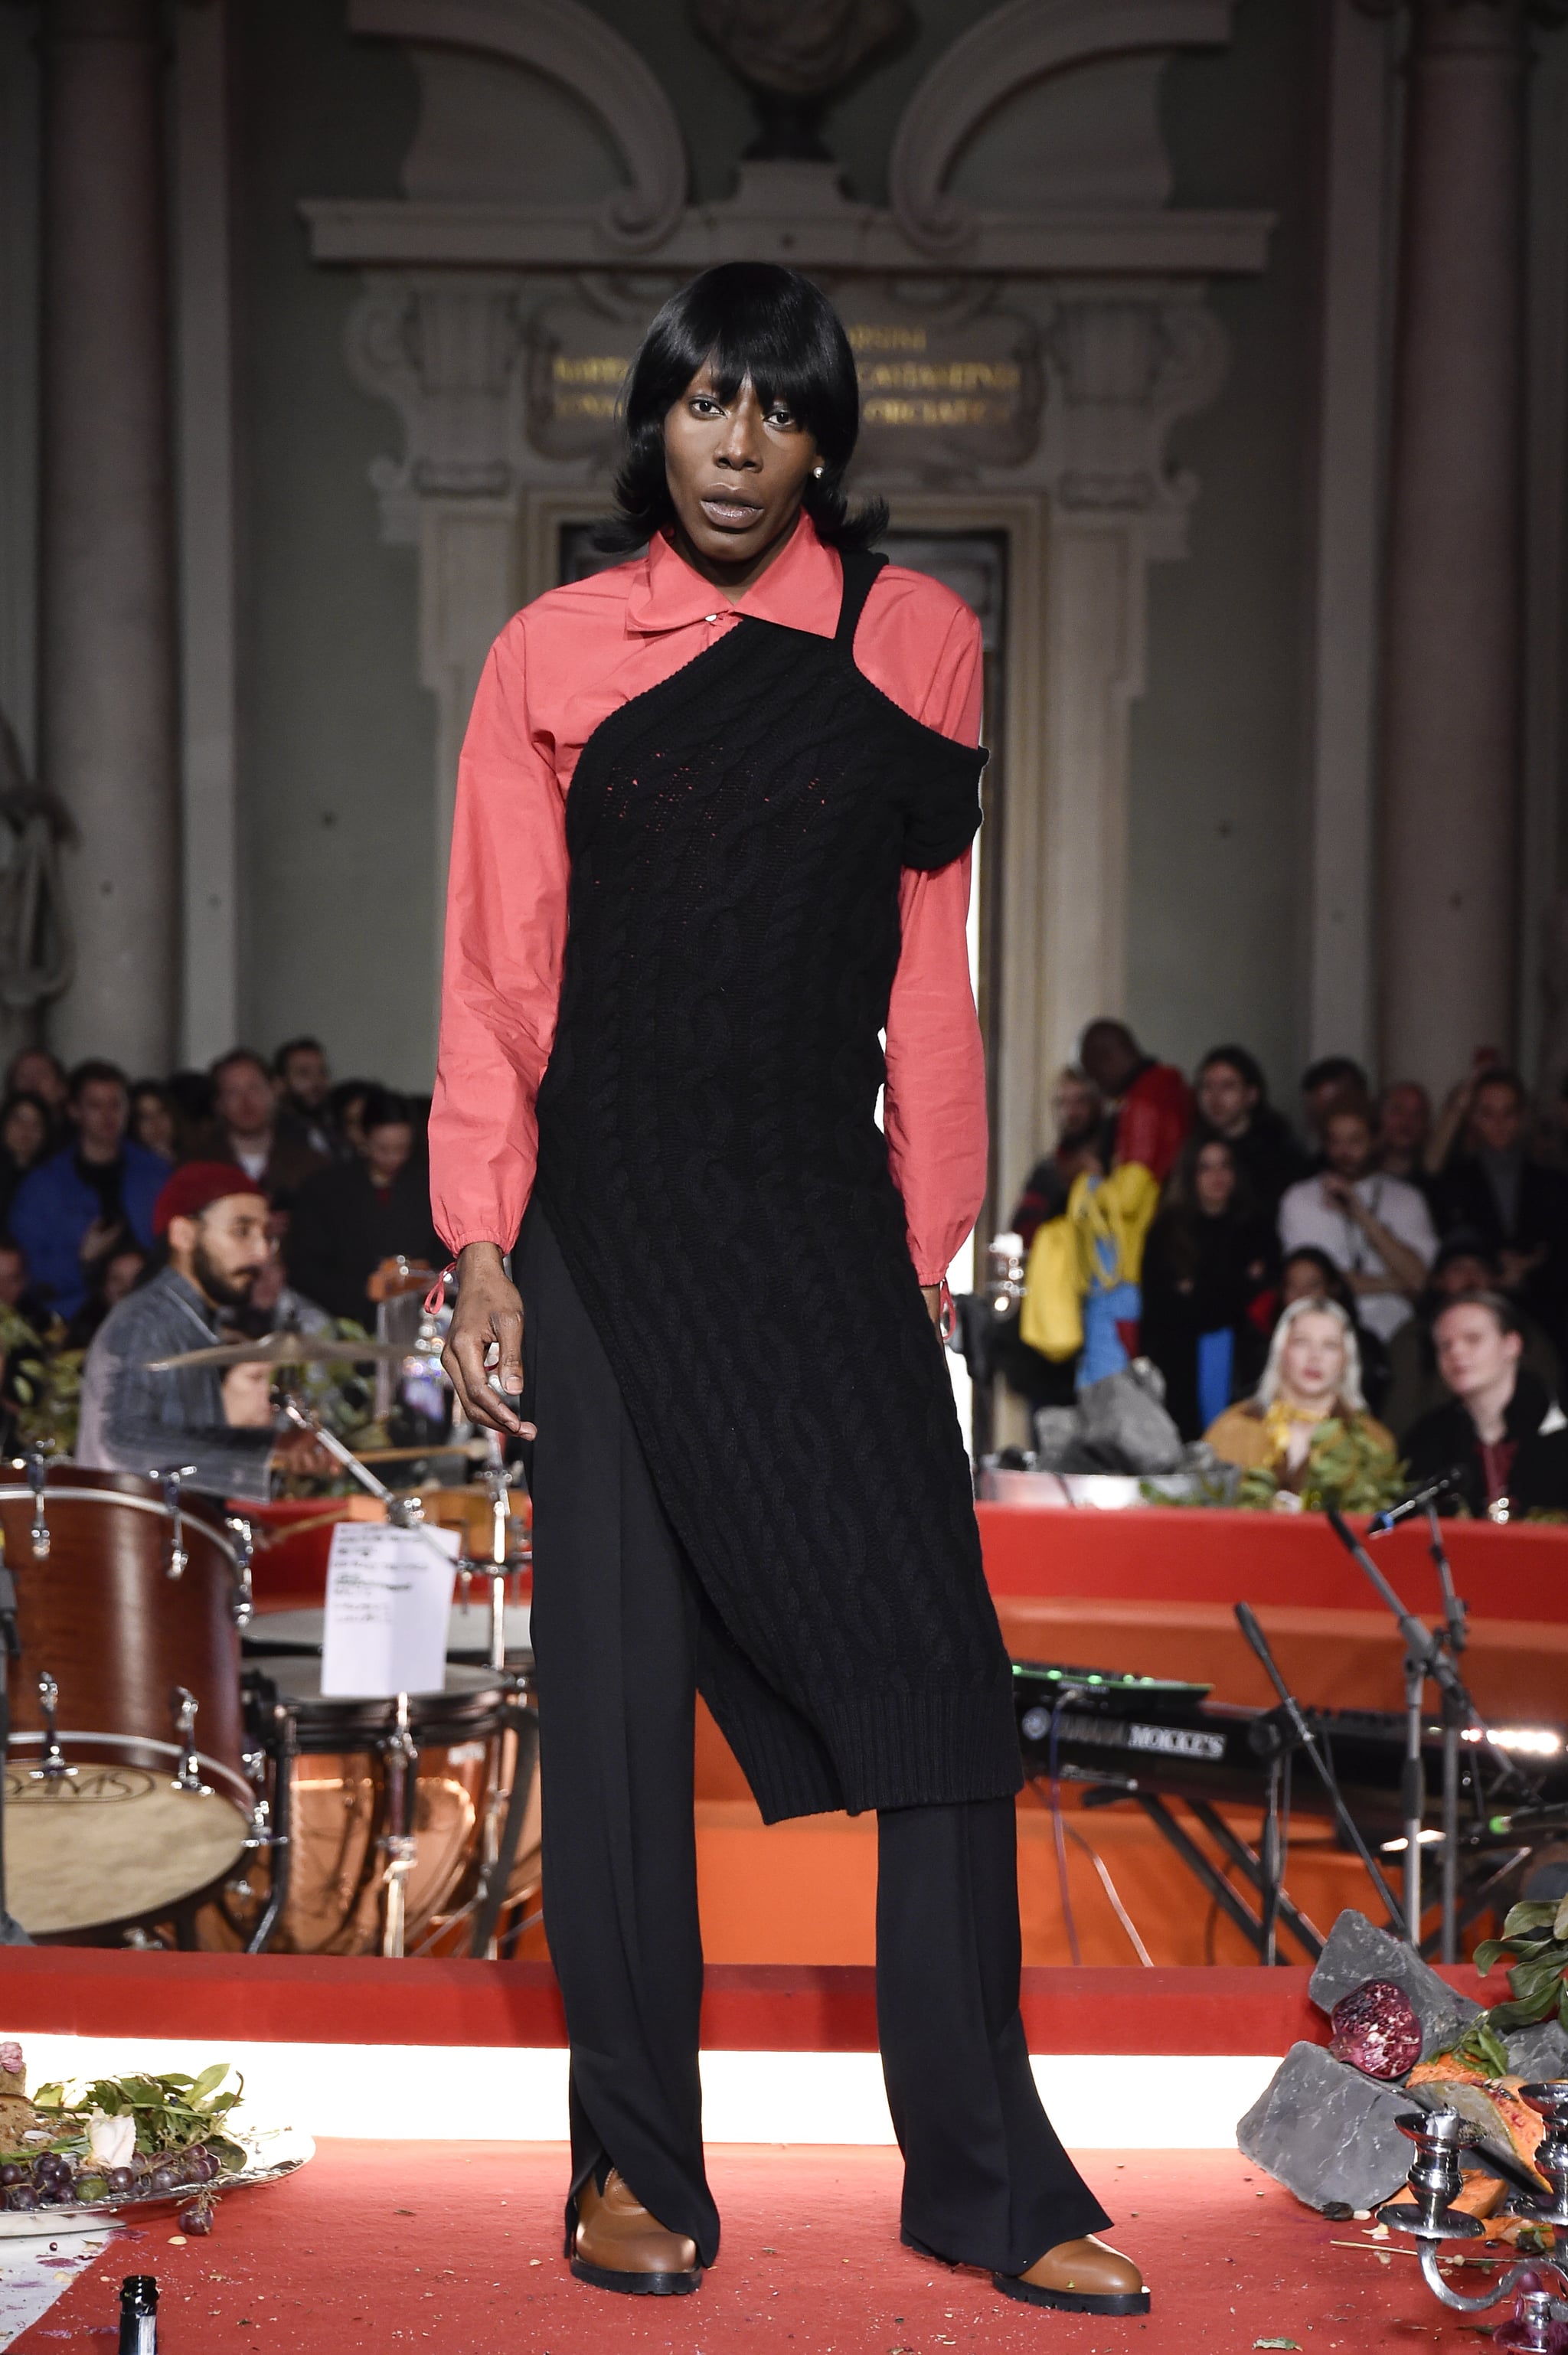 FLORENCE, ITALY - JANUARY 09: A model walks the runway at the Telfar fashion show during Pitti Immagine Uomo 97 at Palazzo Corsini on January 09, 2020 in Florence, Italy. (Photo by Pietro D'Aprano/Getty Images)